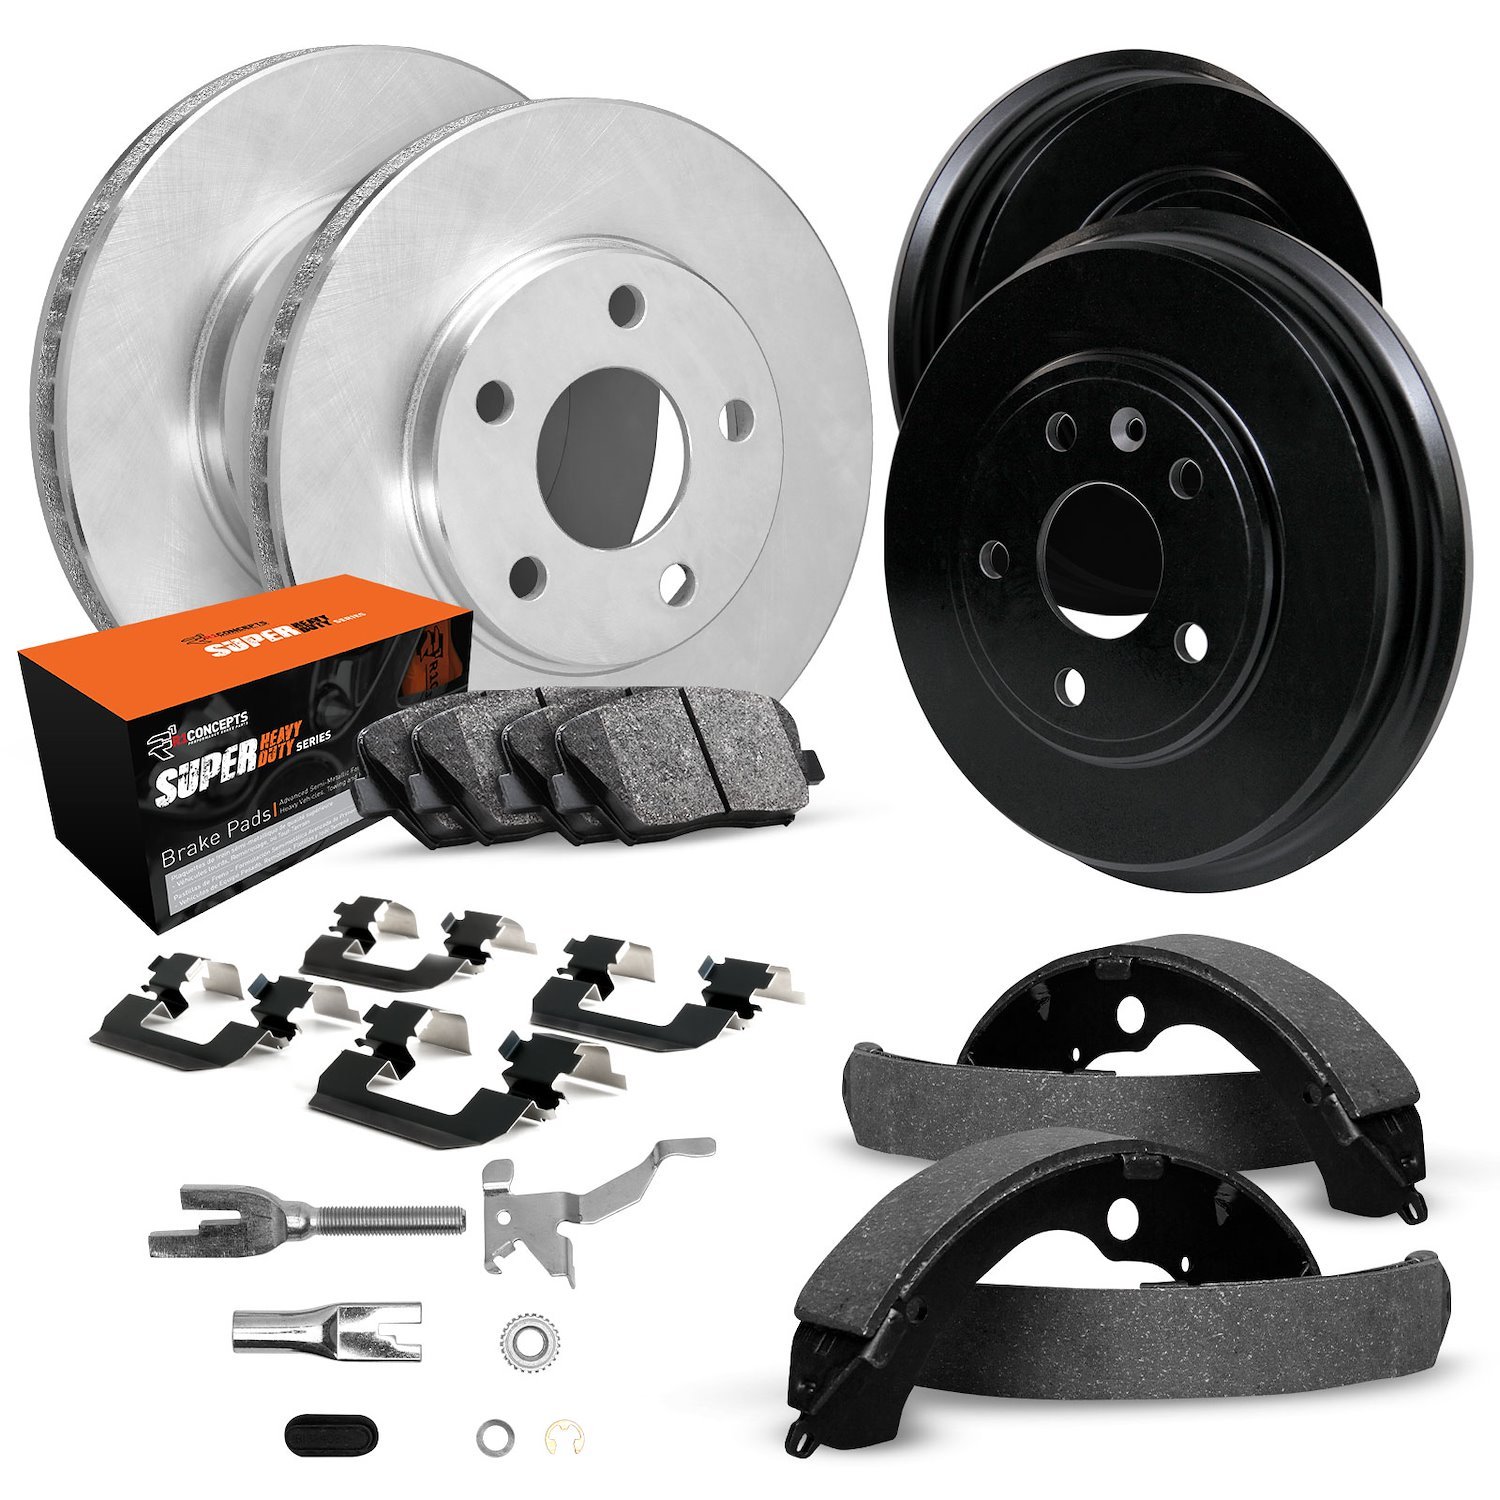 E-Line Blank Brake Rotor & Drum Set w/Super-Duty Pads, Shoes, Hardware, & Adjusters, 1973-1974 Ford/Lincoln/Mercury/Mazda